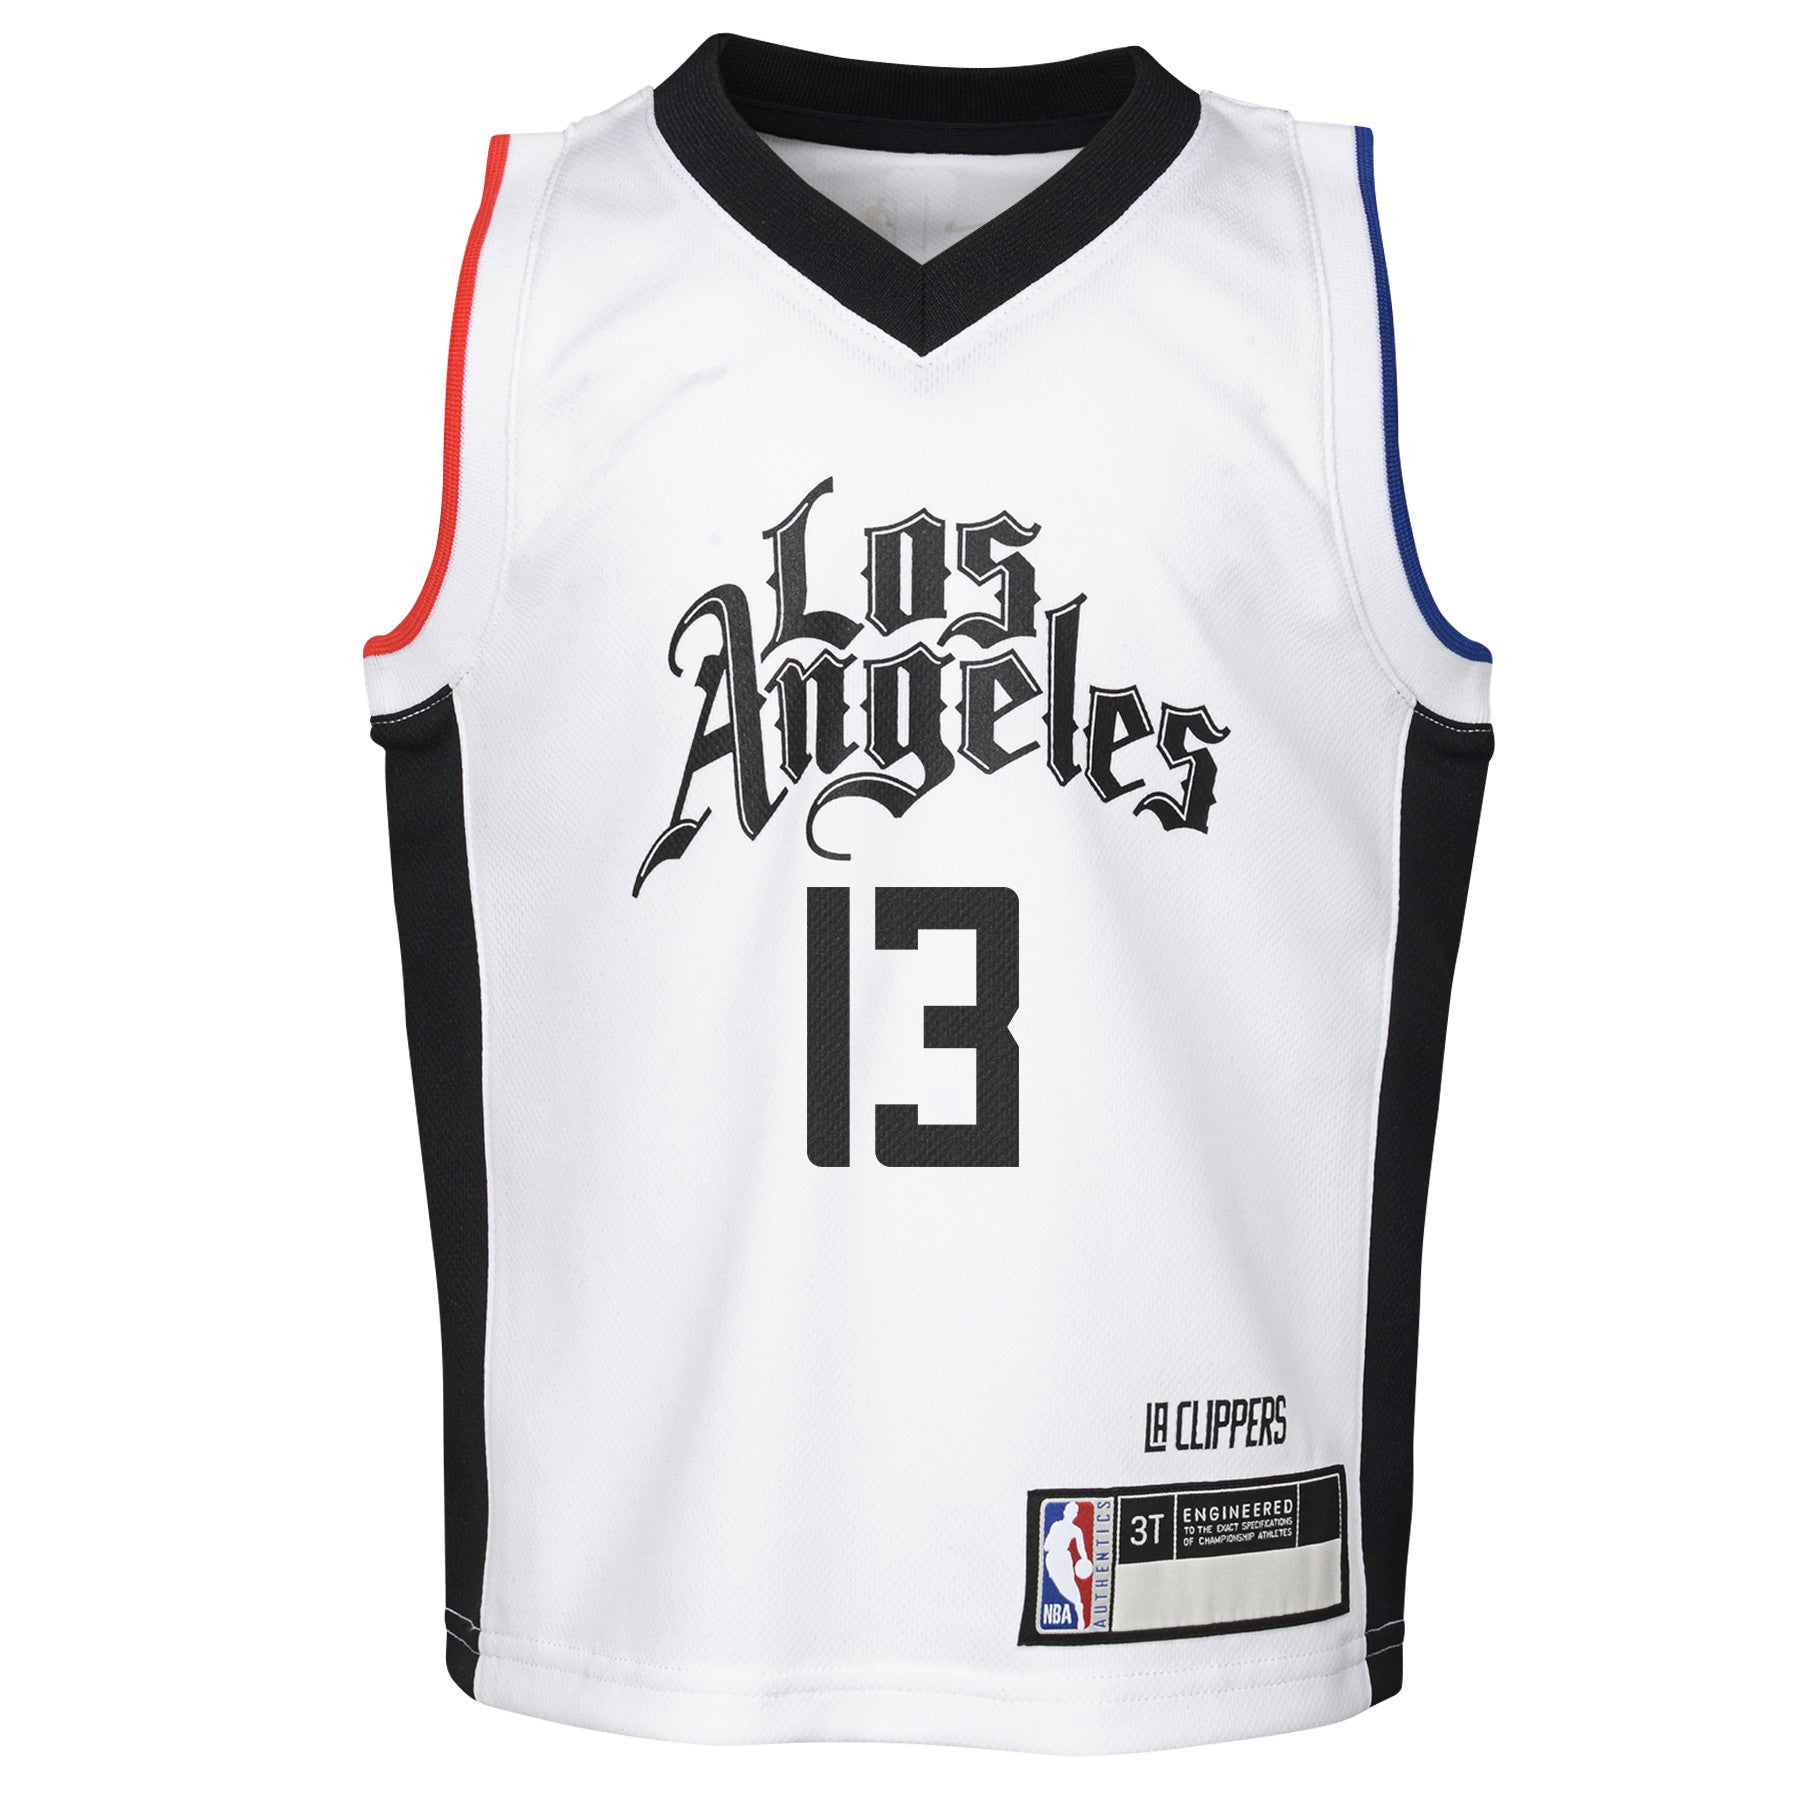 Nike NBA Kids (4-7) Los Angeles Clippers Paul George #13 City Edition –  Fanletic